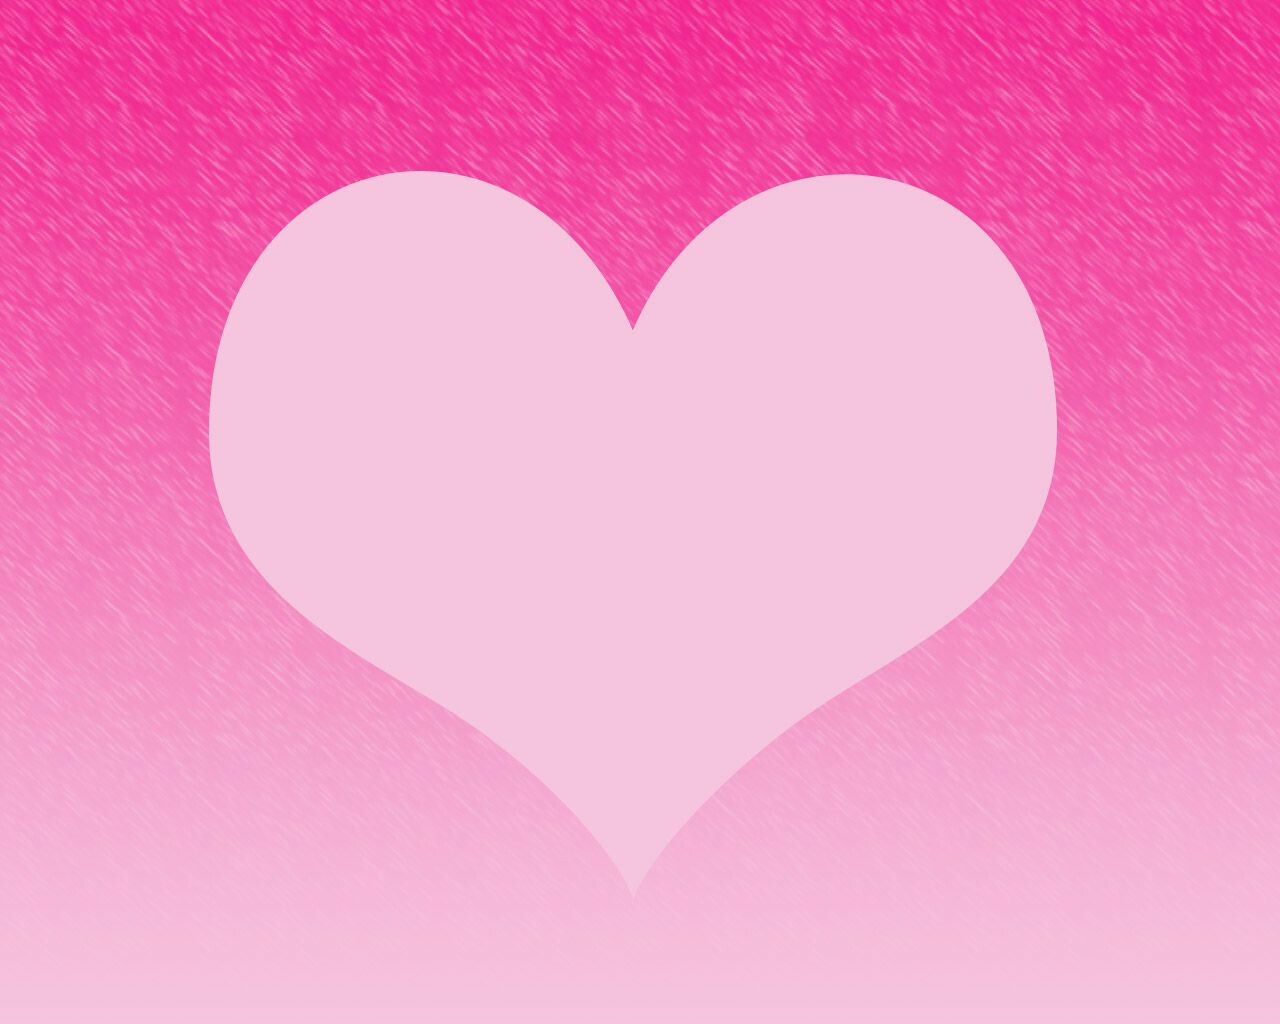 Cute Heart Wallpapers Wallpapers